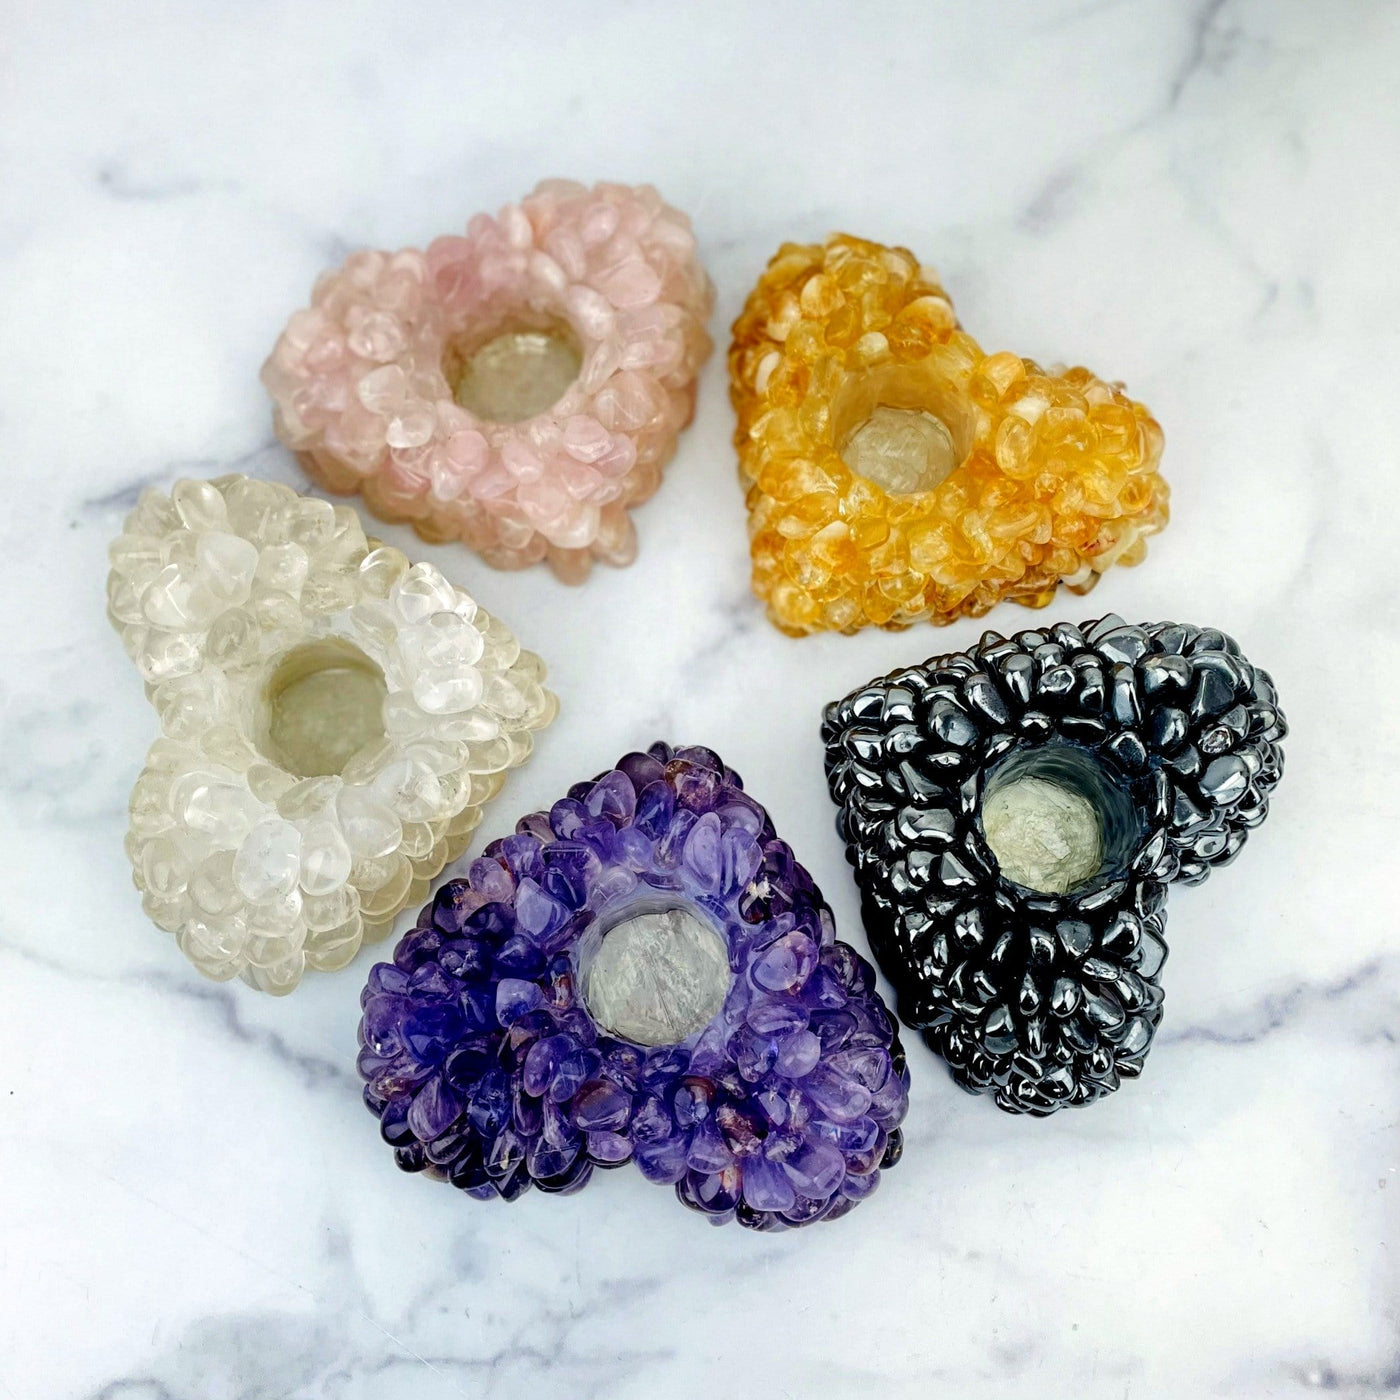 A photo of all the available glued tumbled stone heart candle holders.  Pictured is rose quartz, citrine, crystal quartz, amethyst and hematite.